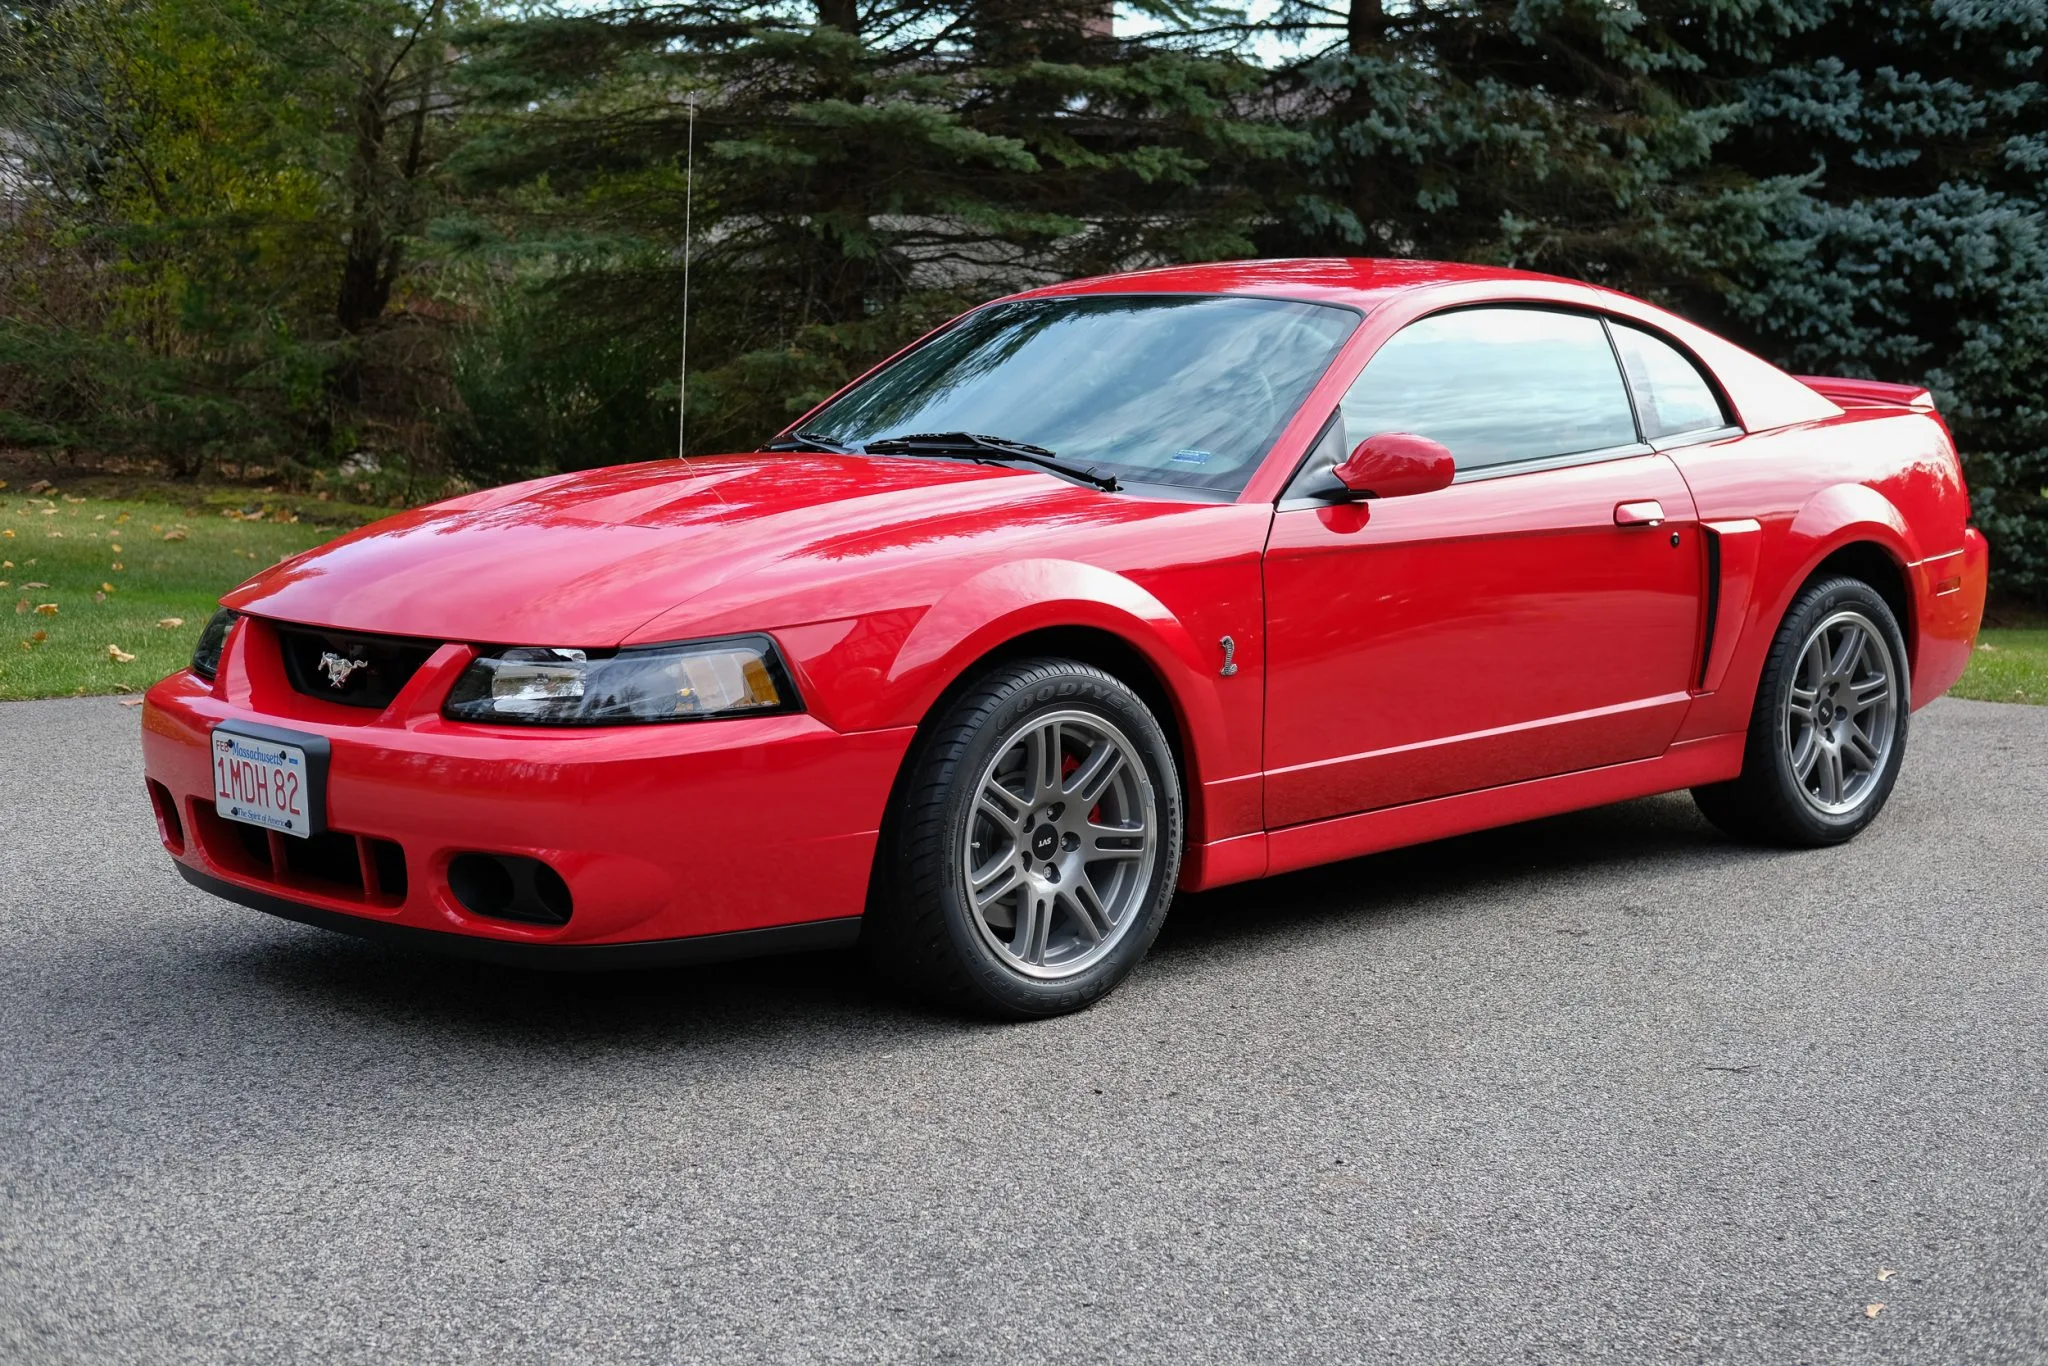 Mustang Of The Day: 2003 Ford Mustang SVT Cobra 10th Anniversary